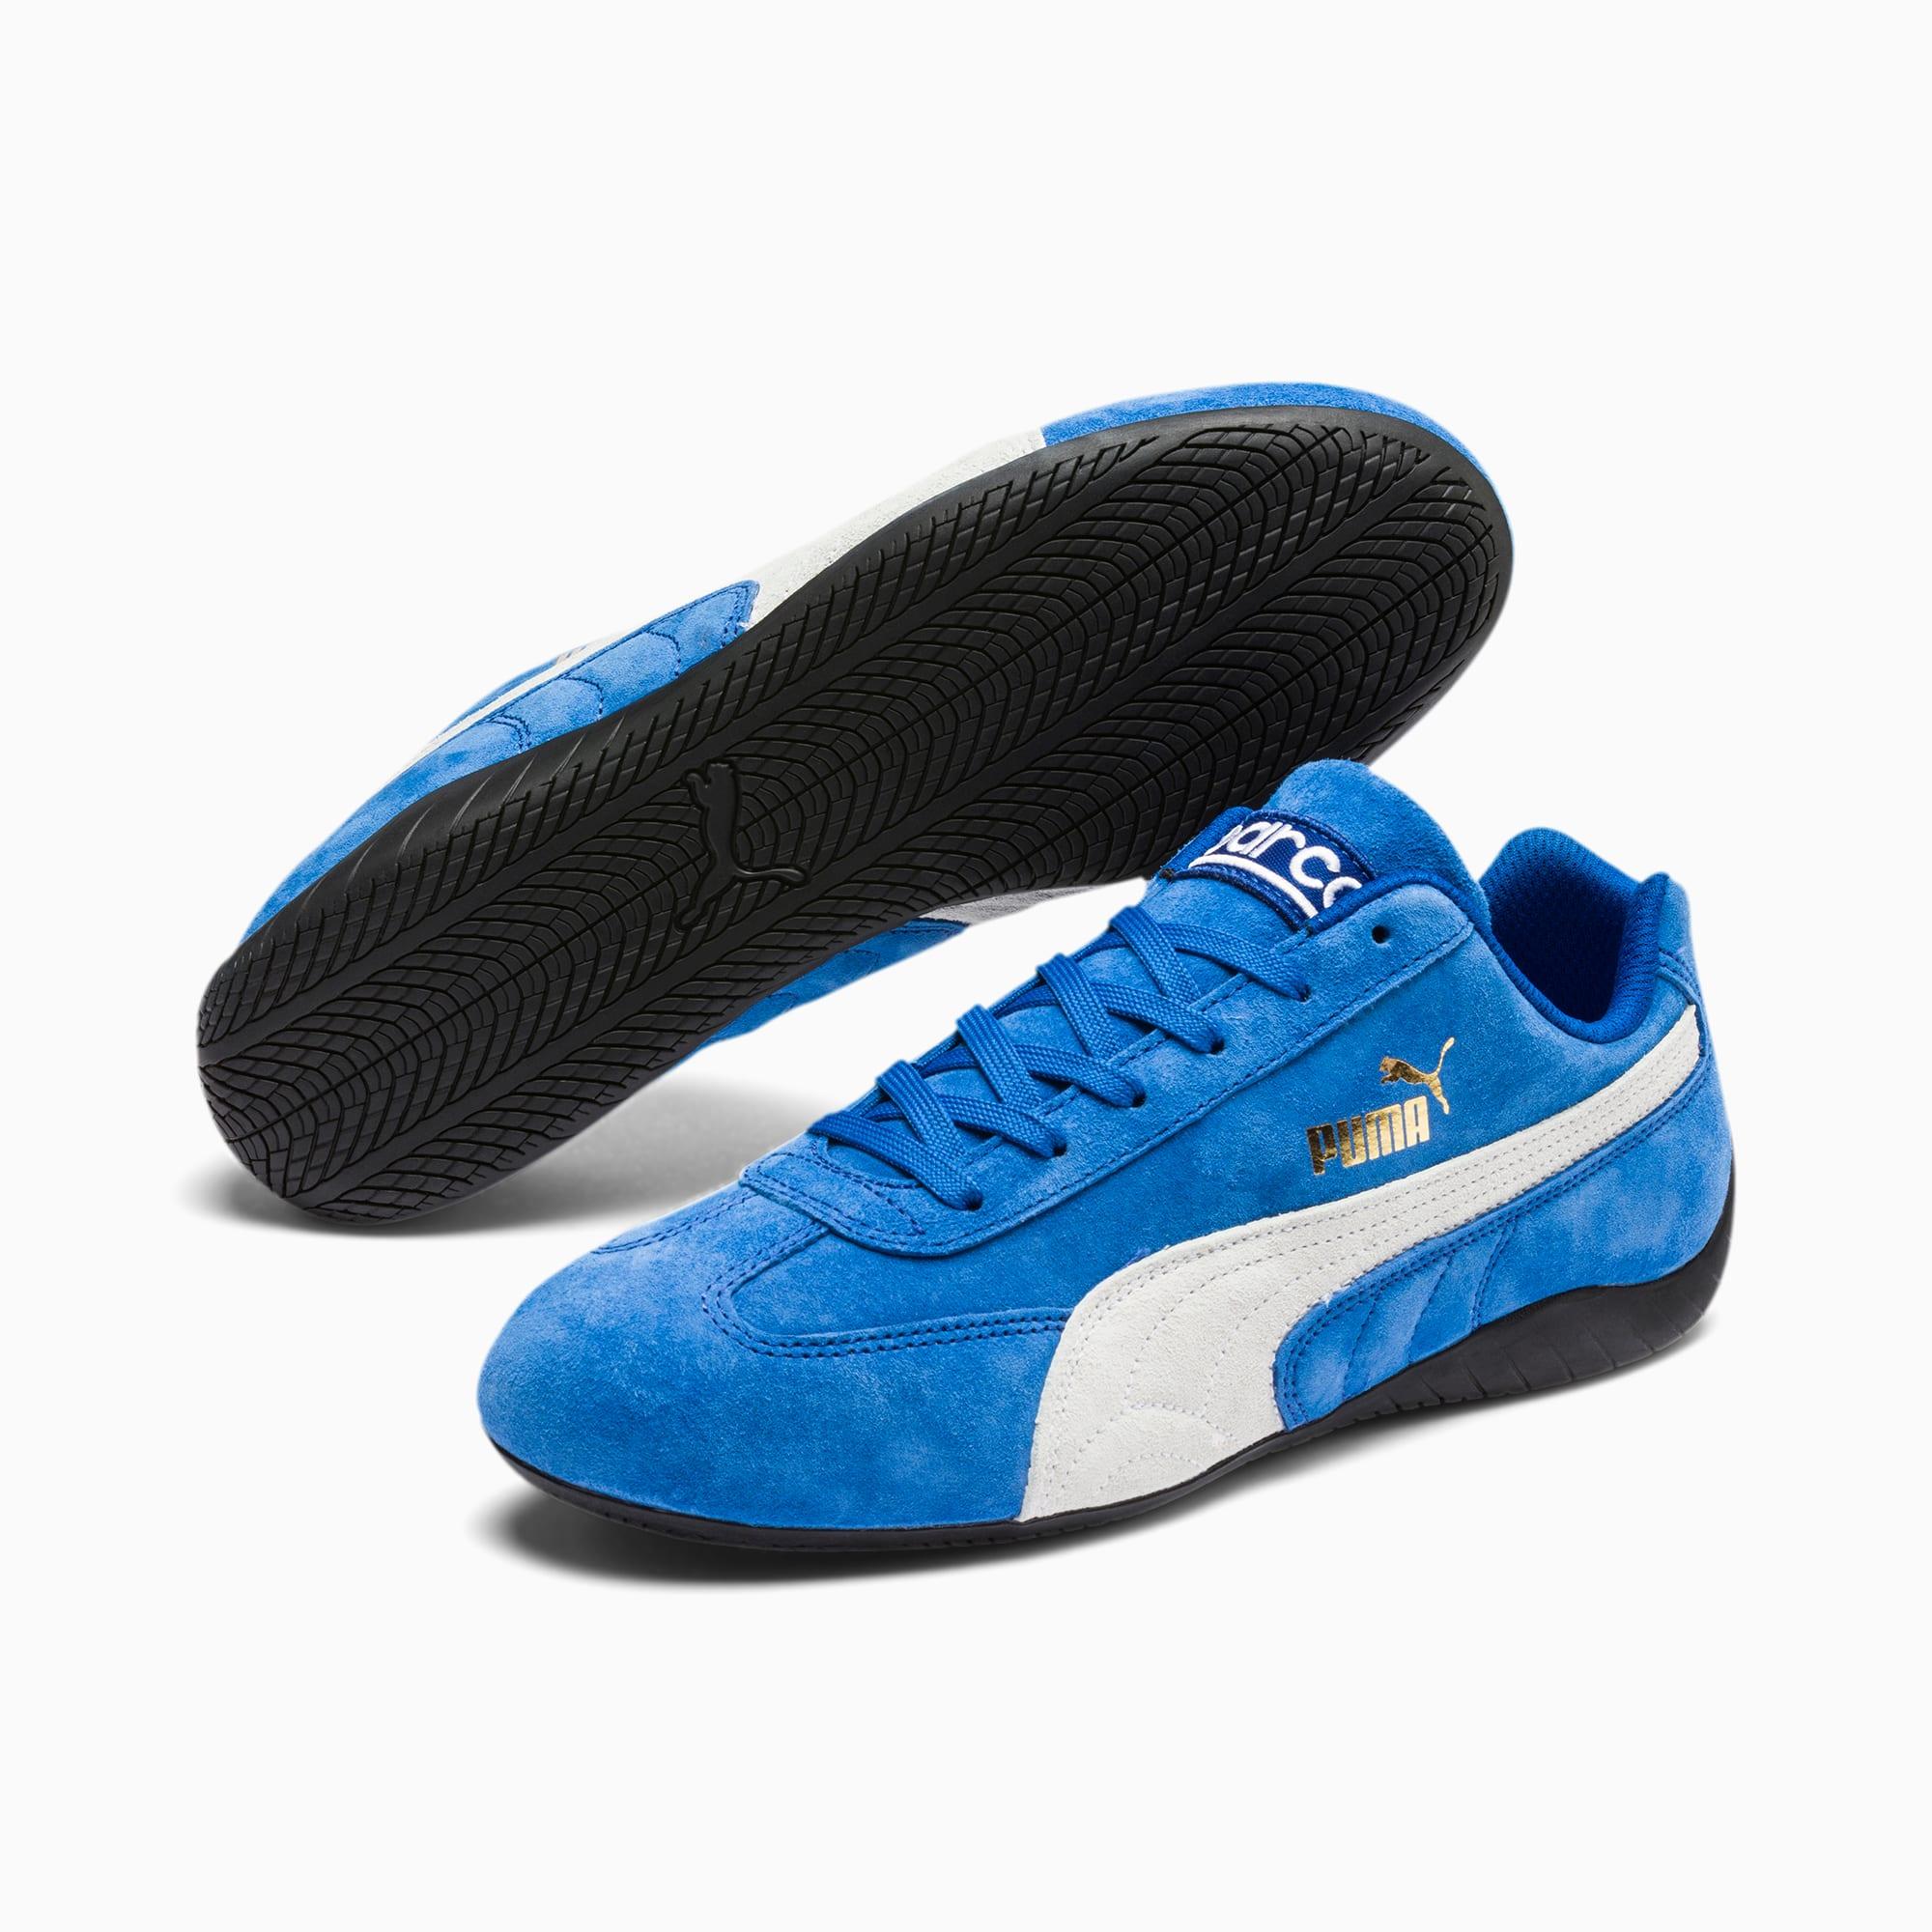 puma speed cat sparco shoes